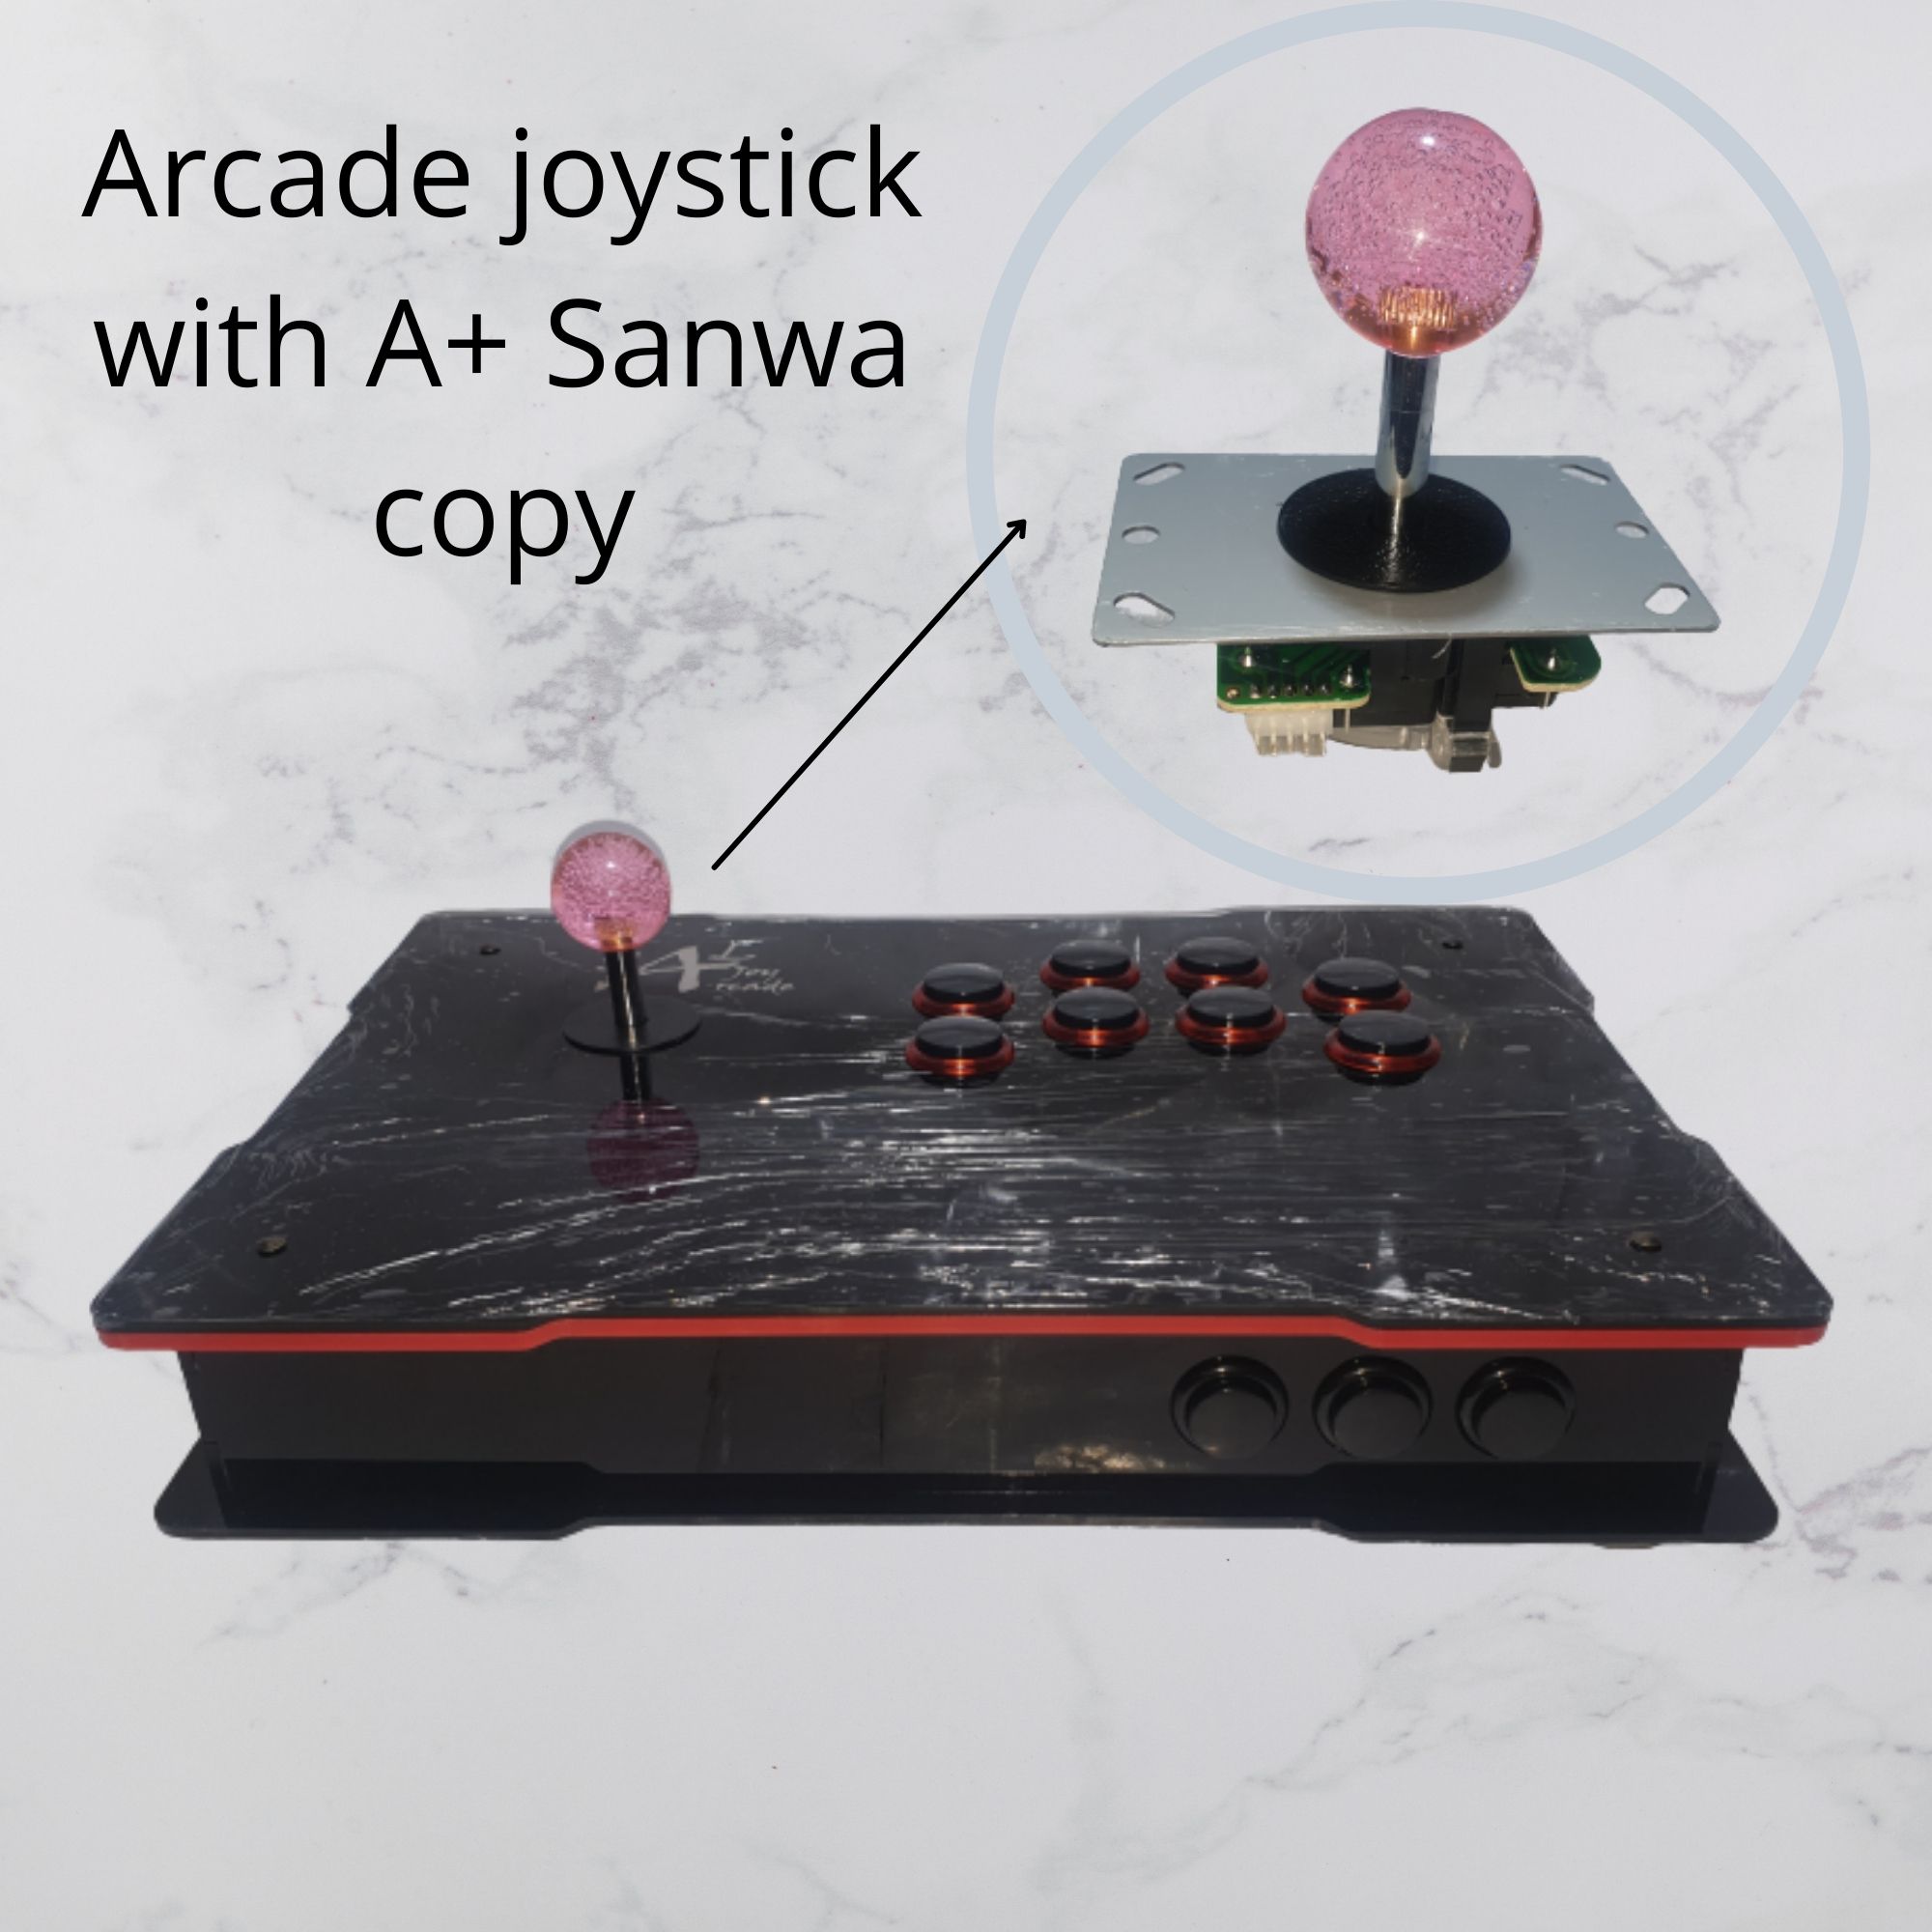 A+ SANWA COPY PS4 Usb Arcade joystick gamepad for Playstation 4, Playstation3, Windows and Android [Model: SSAP4]